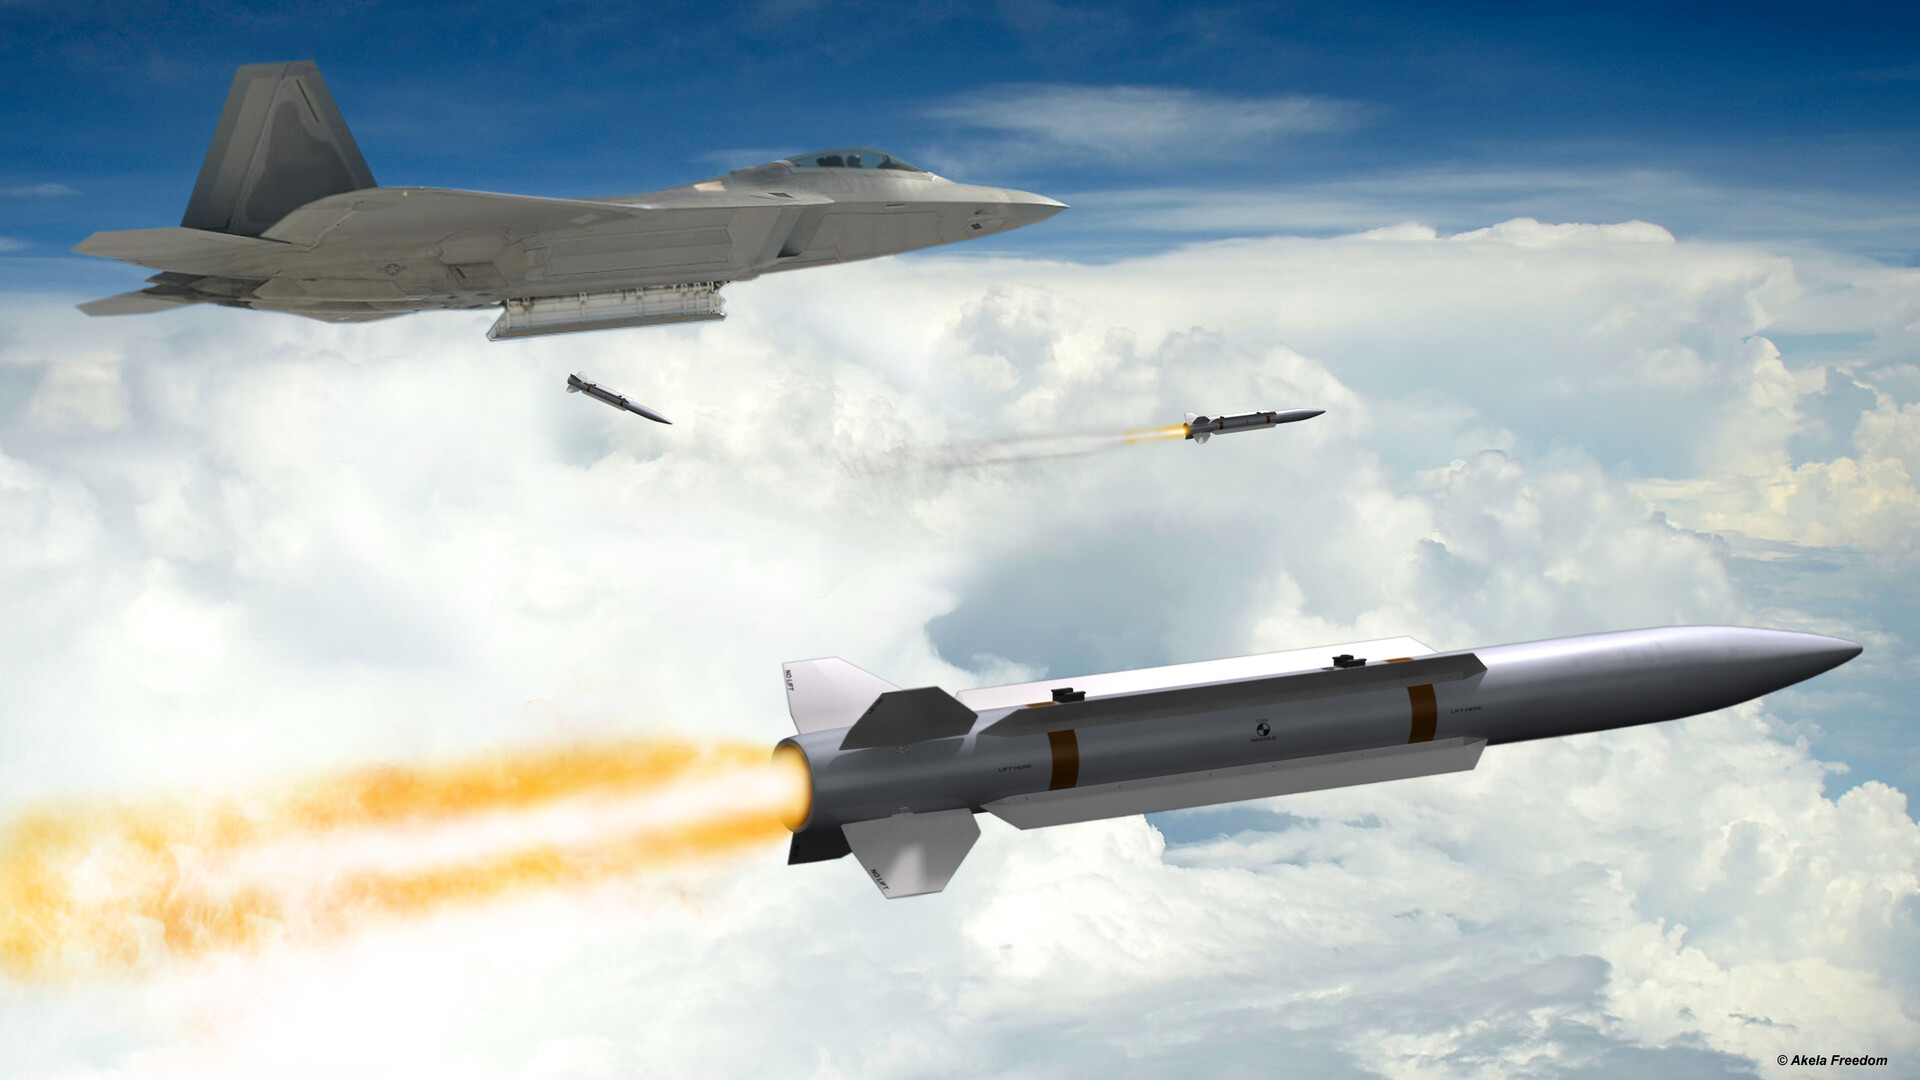 Raytheon received $21 million to develop next-generation air-to-air missiles to replace AIM-120 AMRAAM and AIM-9X Sidewinder